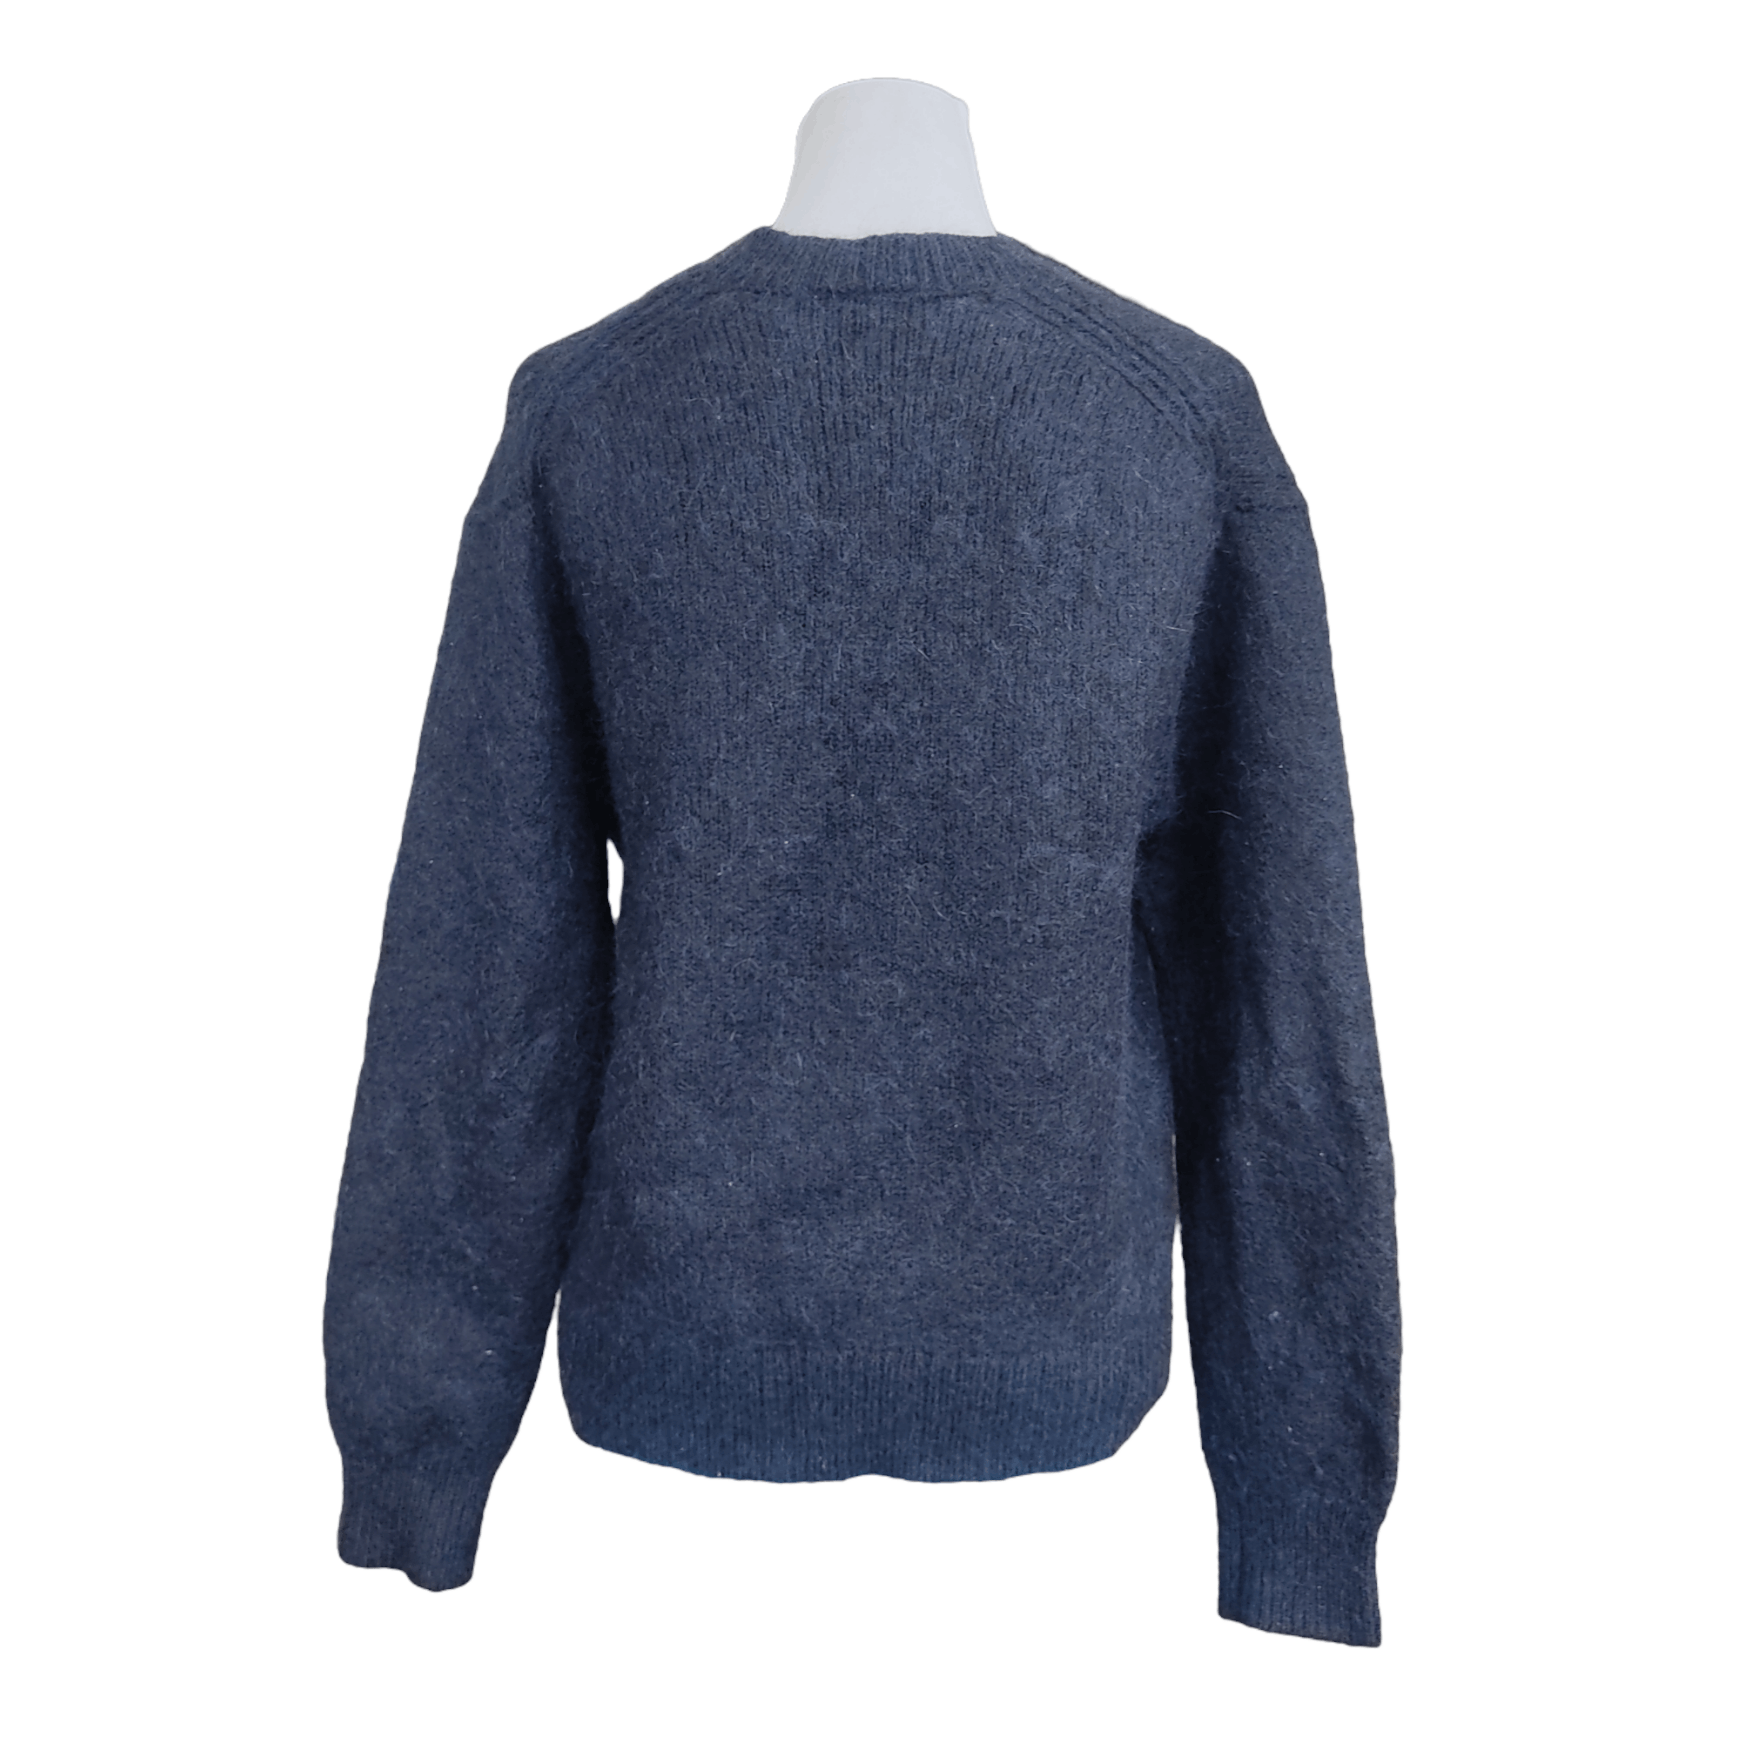 Uniqlo UUU x LEMAIRE Under Cover Mohair Wool Knitted Sweater - 2